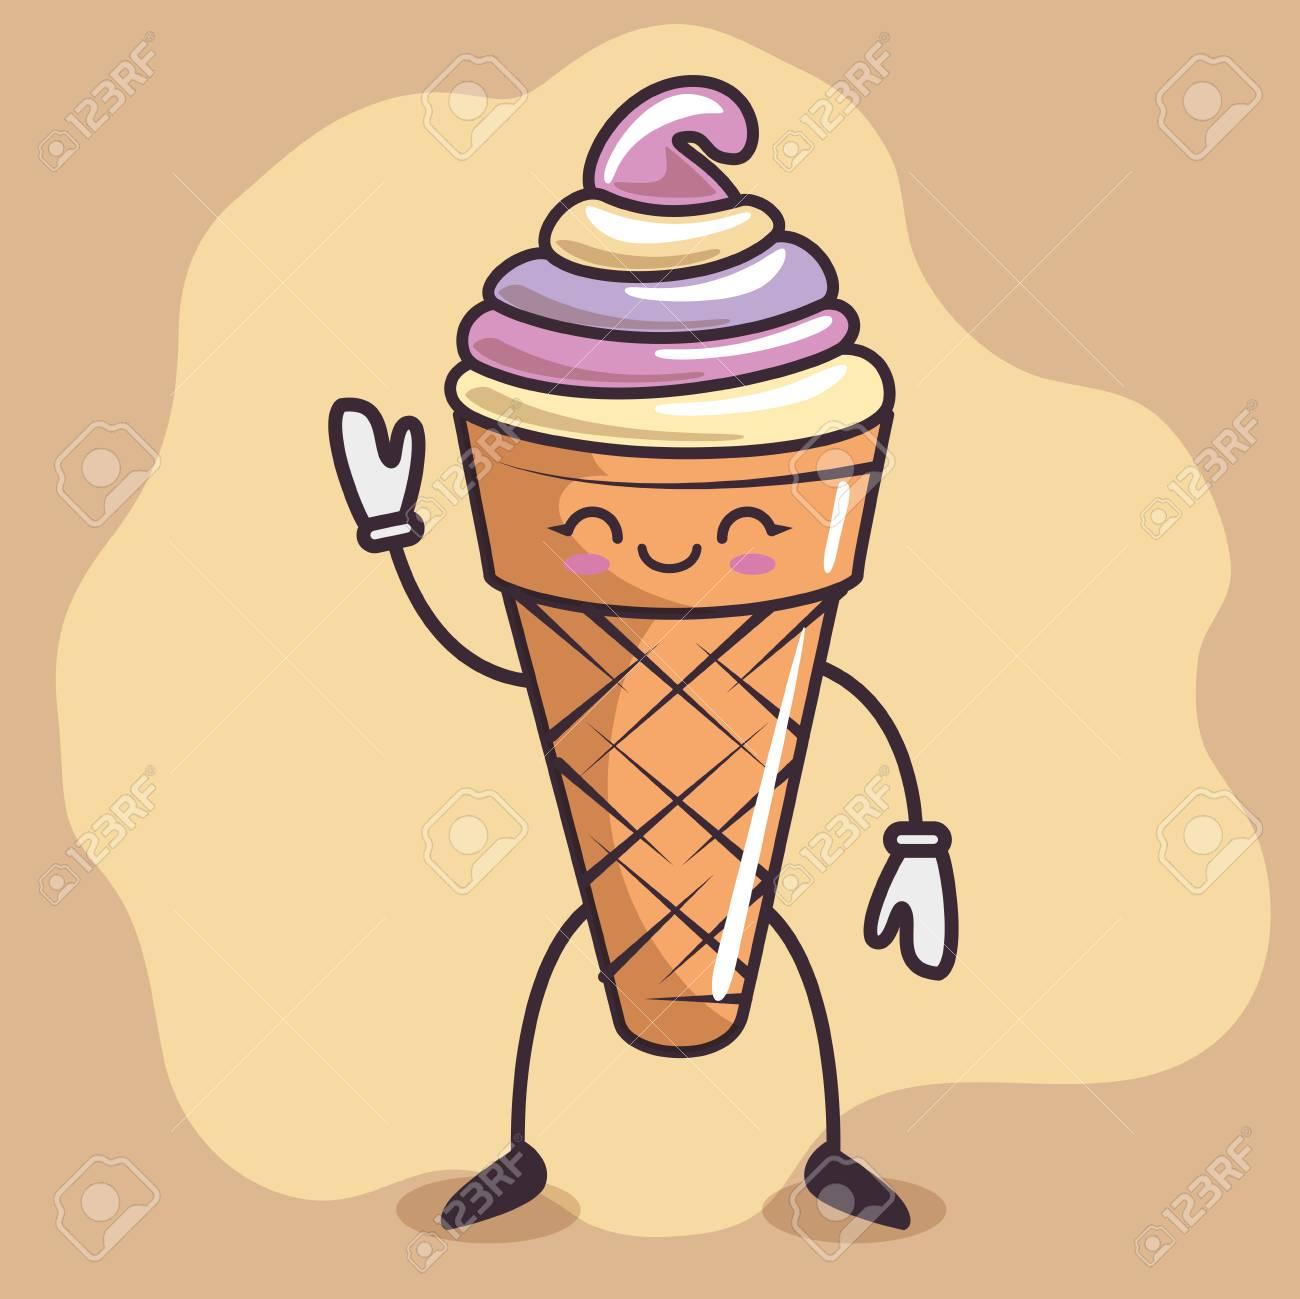 Kawaii Ice Cream Over Beige And Light Brown Background Vector